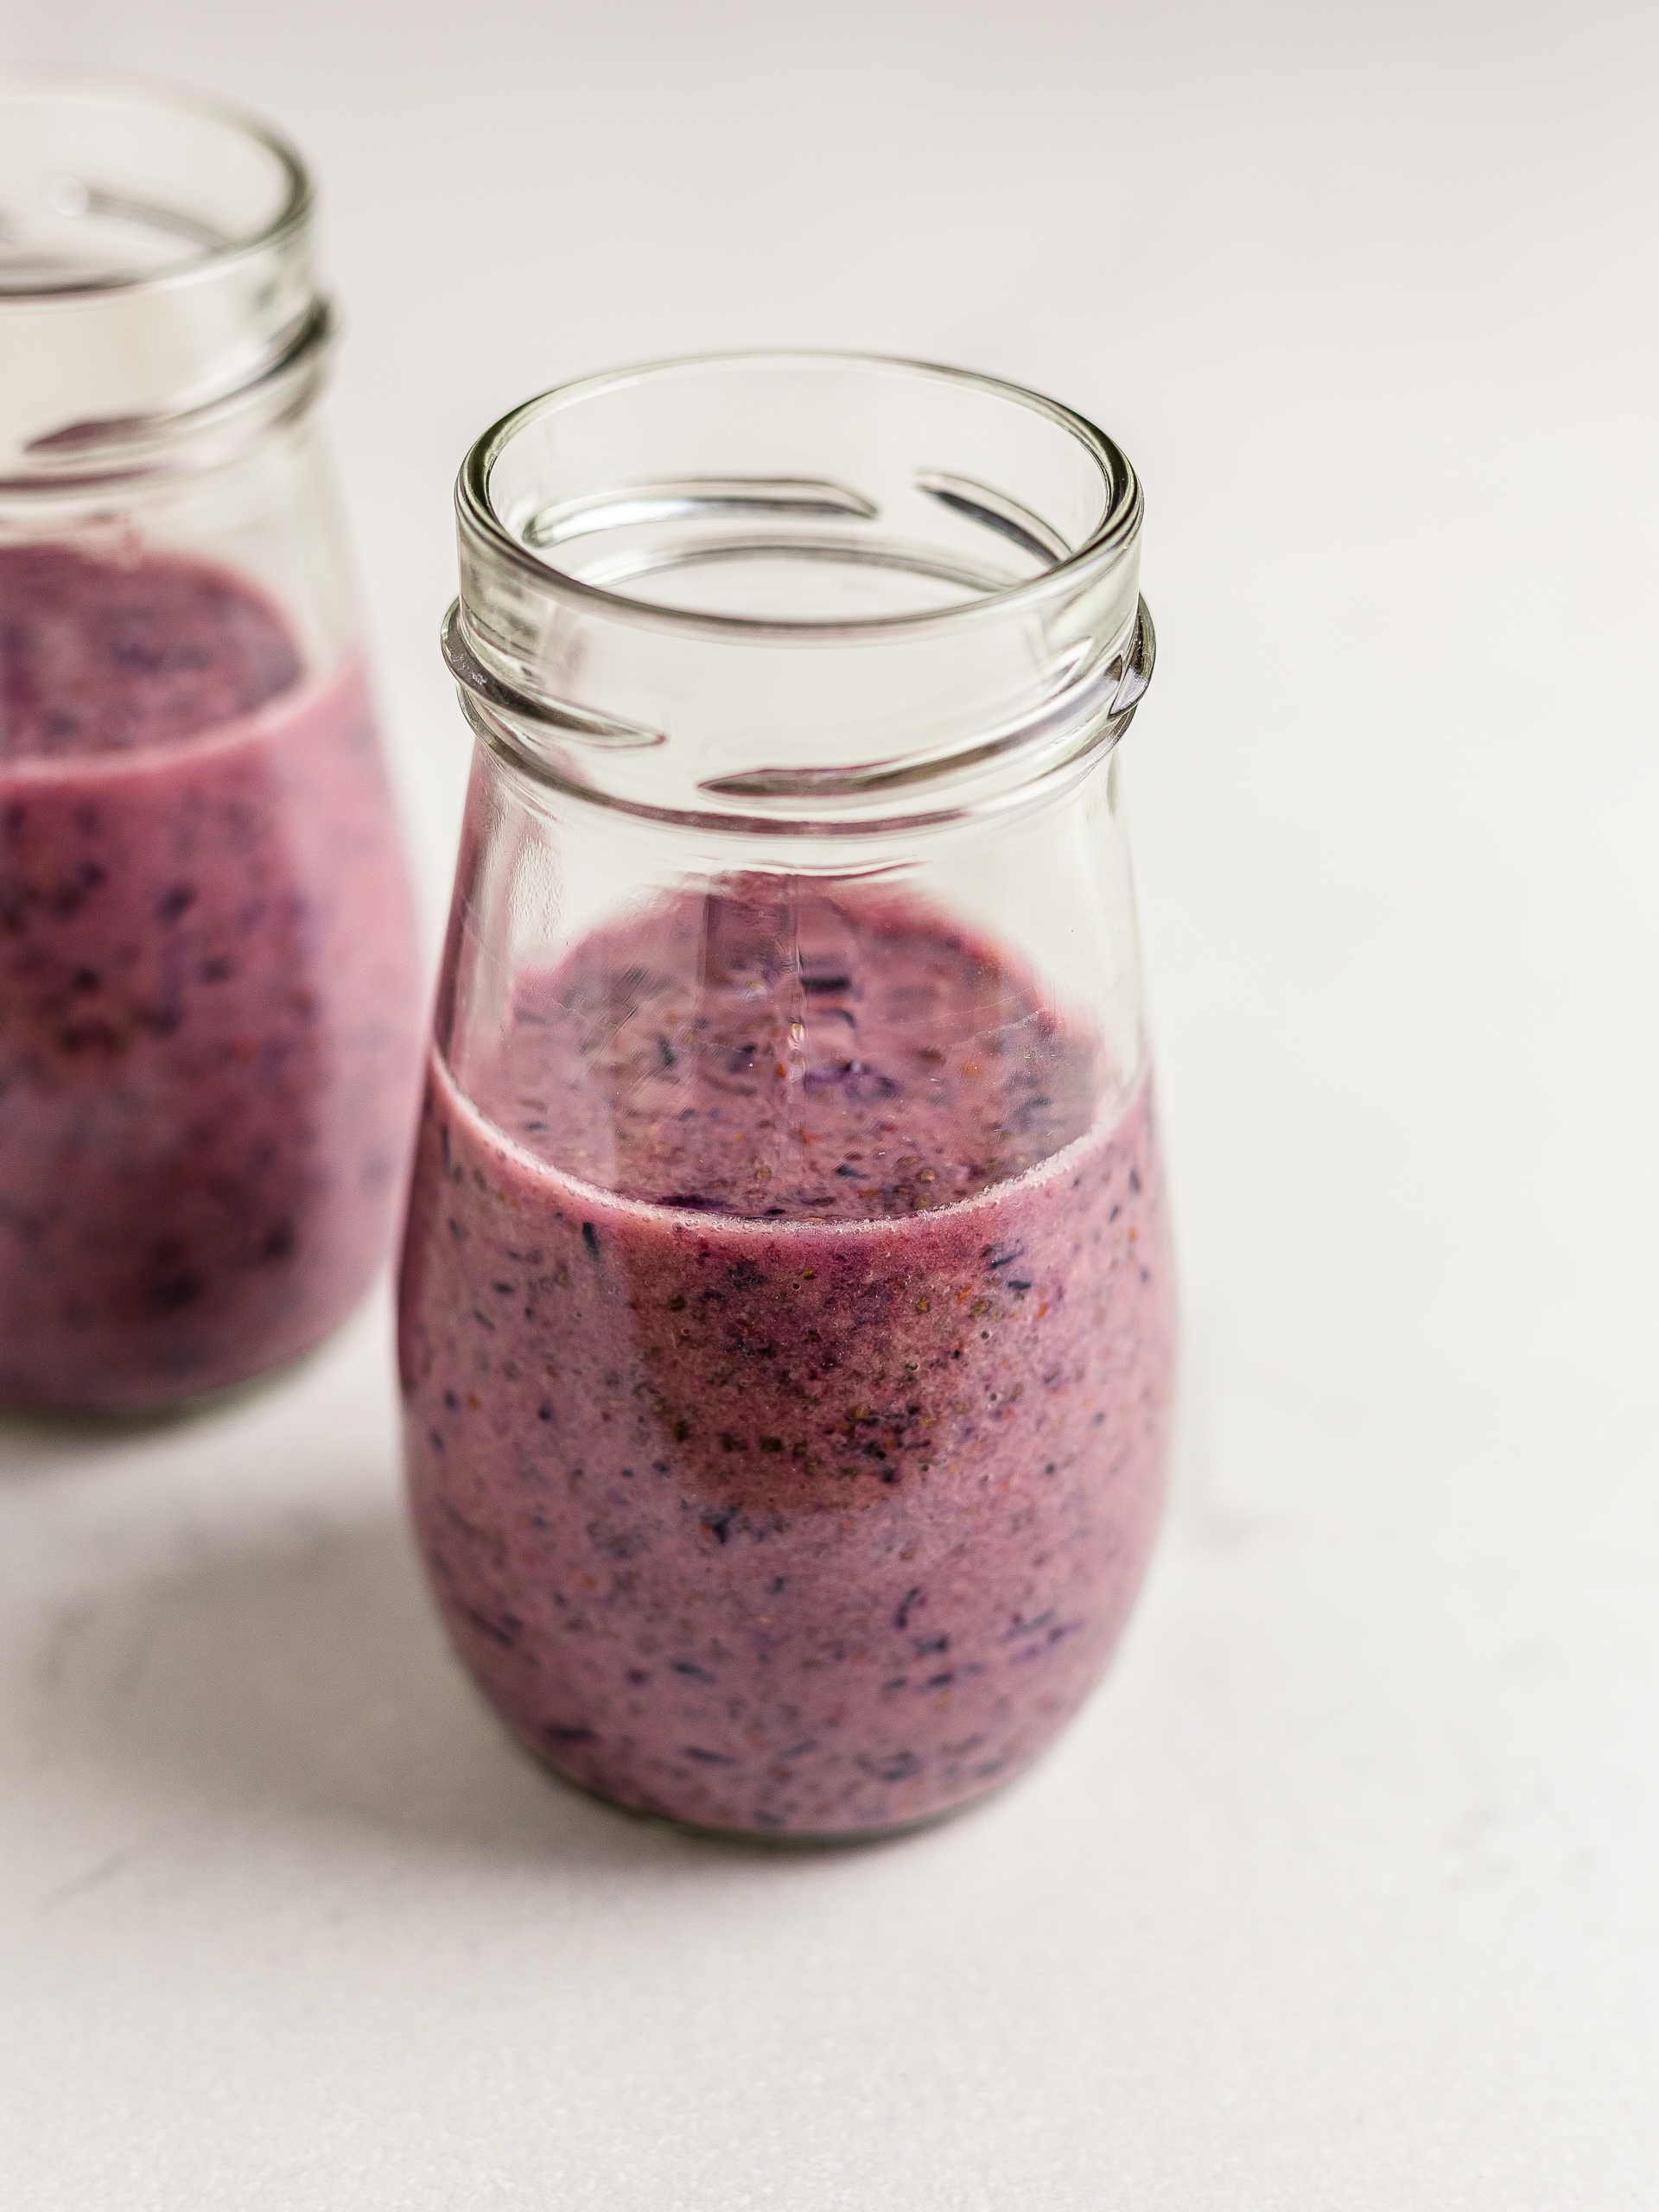 blueberry chia seeds pudding in a jar